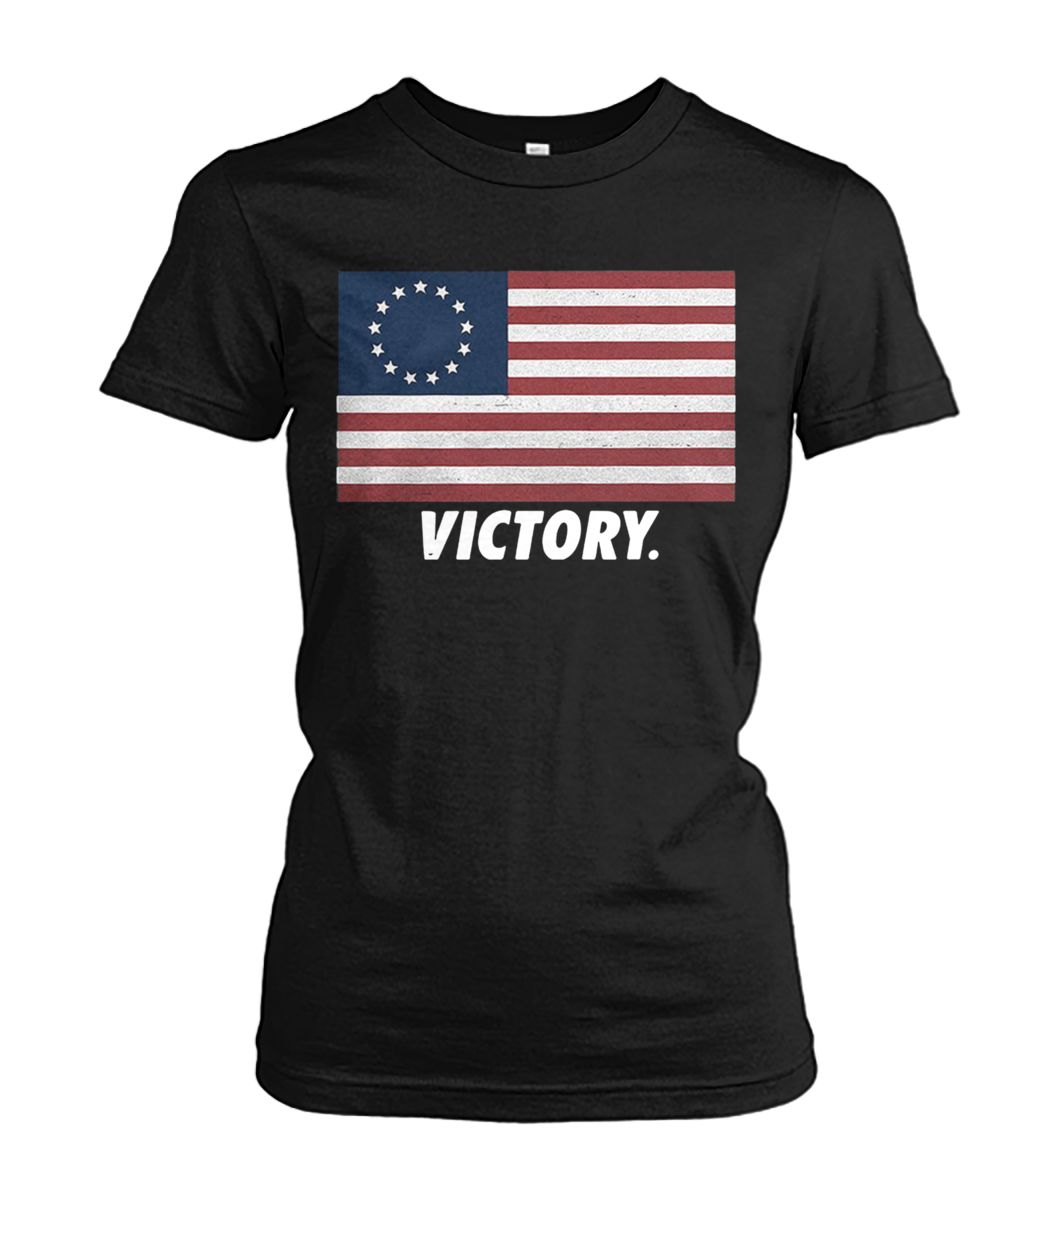 Betsy ross flag the first american flag victory women's crew tee